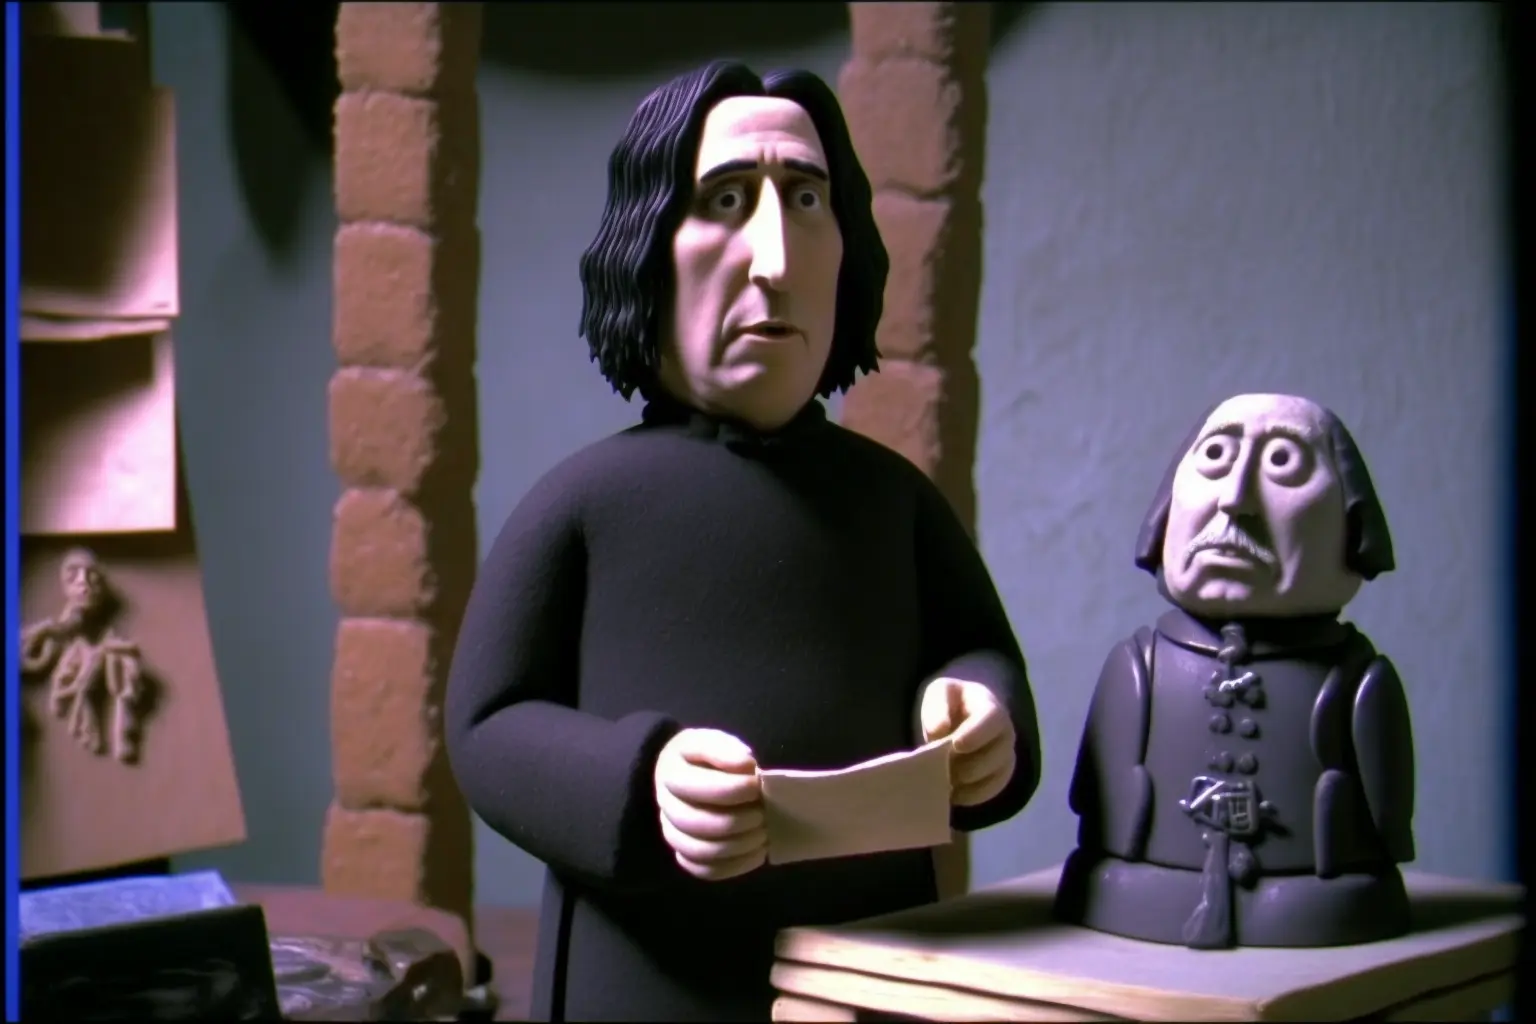 DVD screengrab from stop motion movie, claymation, Professor Snape teaching class, directed by Tim Burton